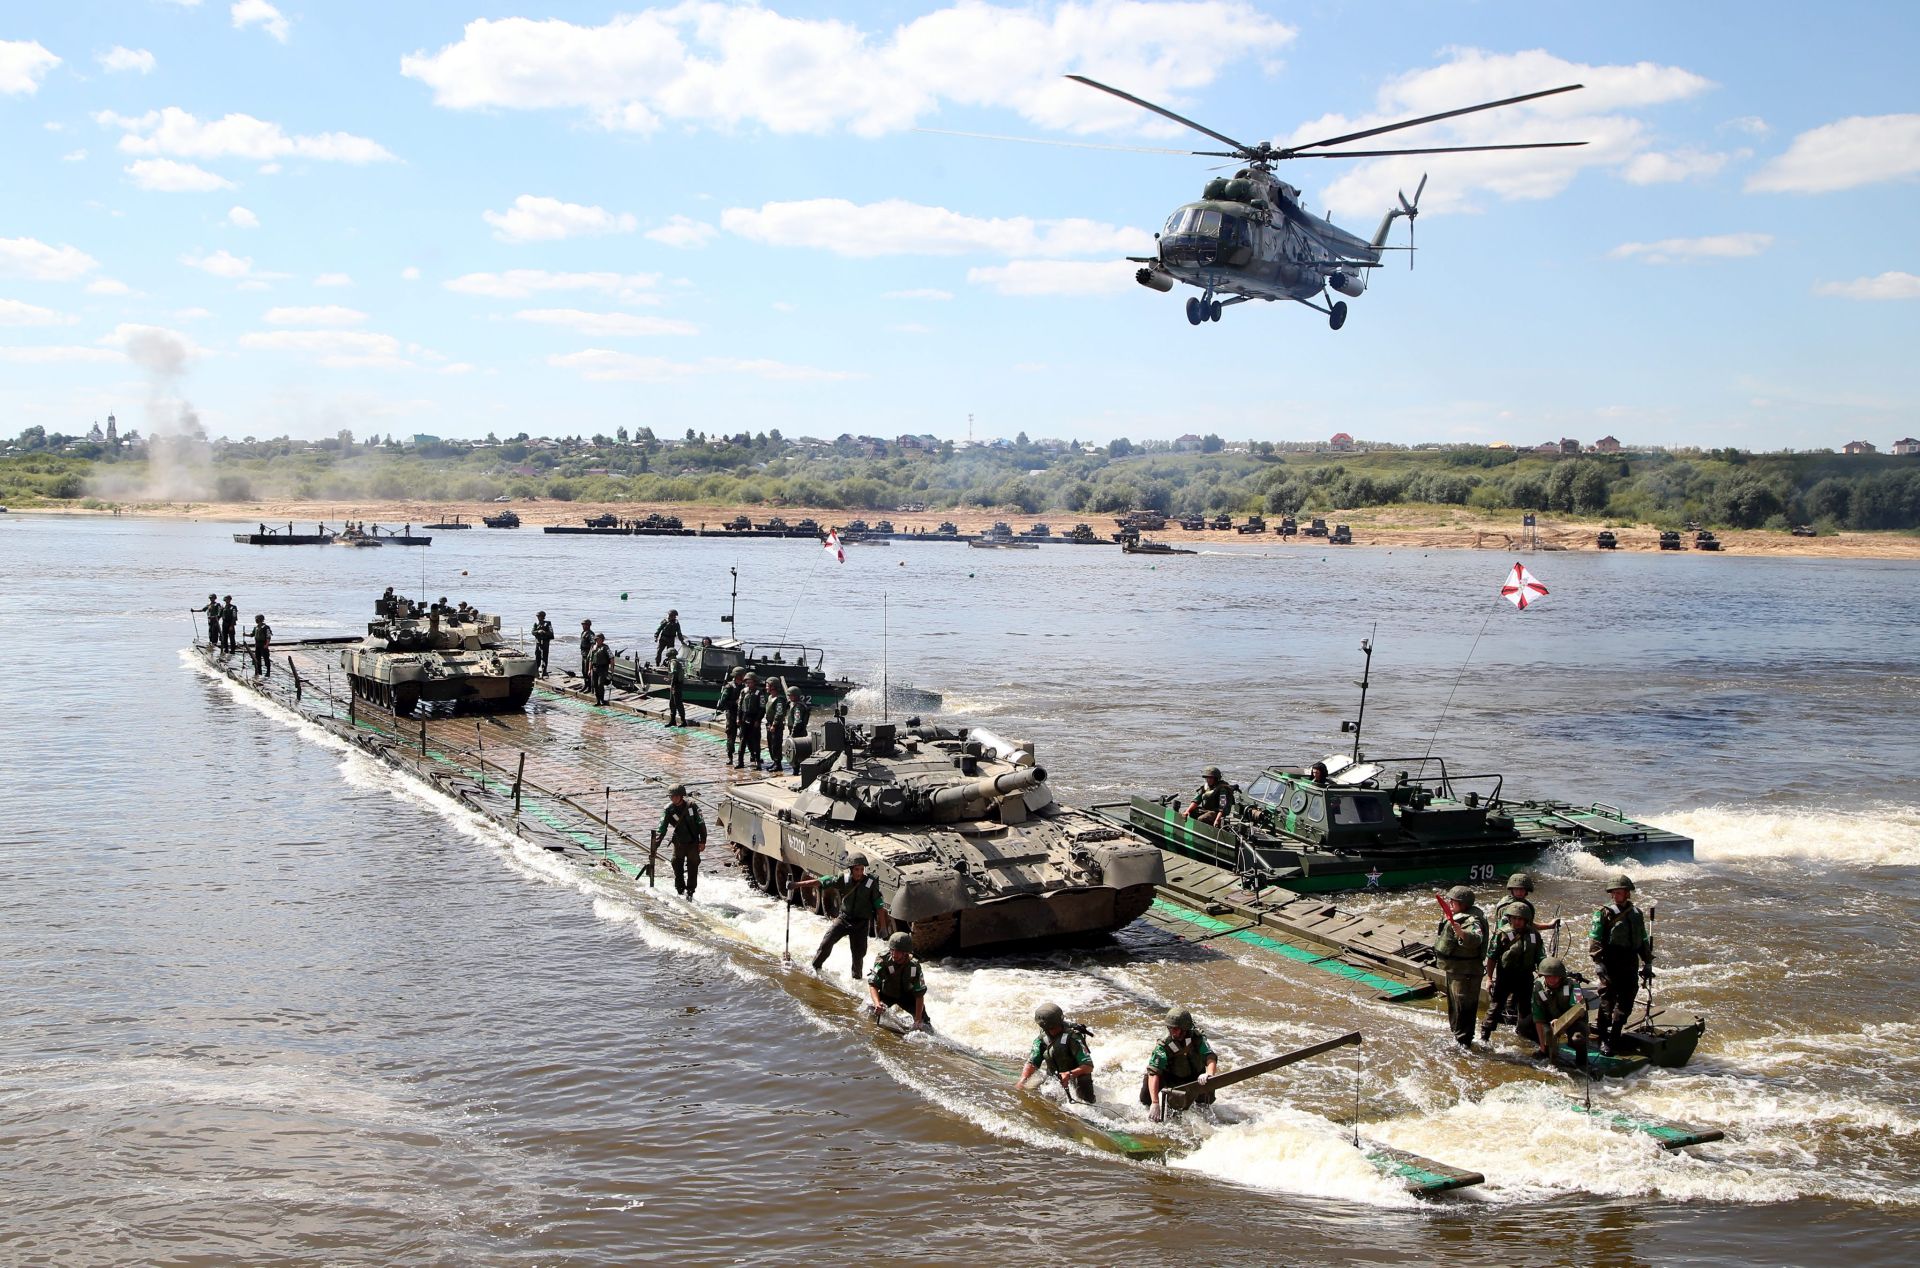 epa05458789 Soldiers from Russia take part in the Open Water competition for pontoon bridges as a part of Army Games  2016 in the town of Murom, Russia, 06 August 2016. Some 121 teams from 19 countries will compete in 23 military disciplines in different military grounds in Russia. The event runs from 30 July to 13 August.  EPA/MAXIM SHIPENKOV